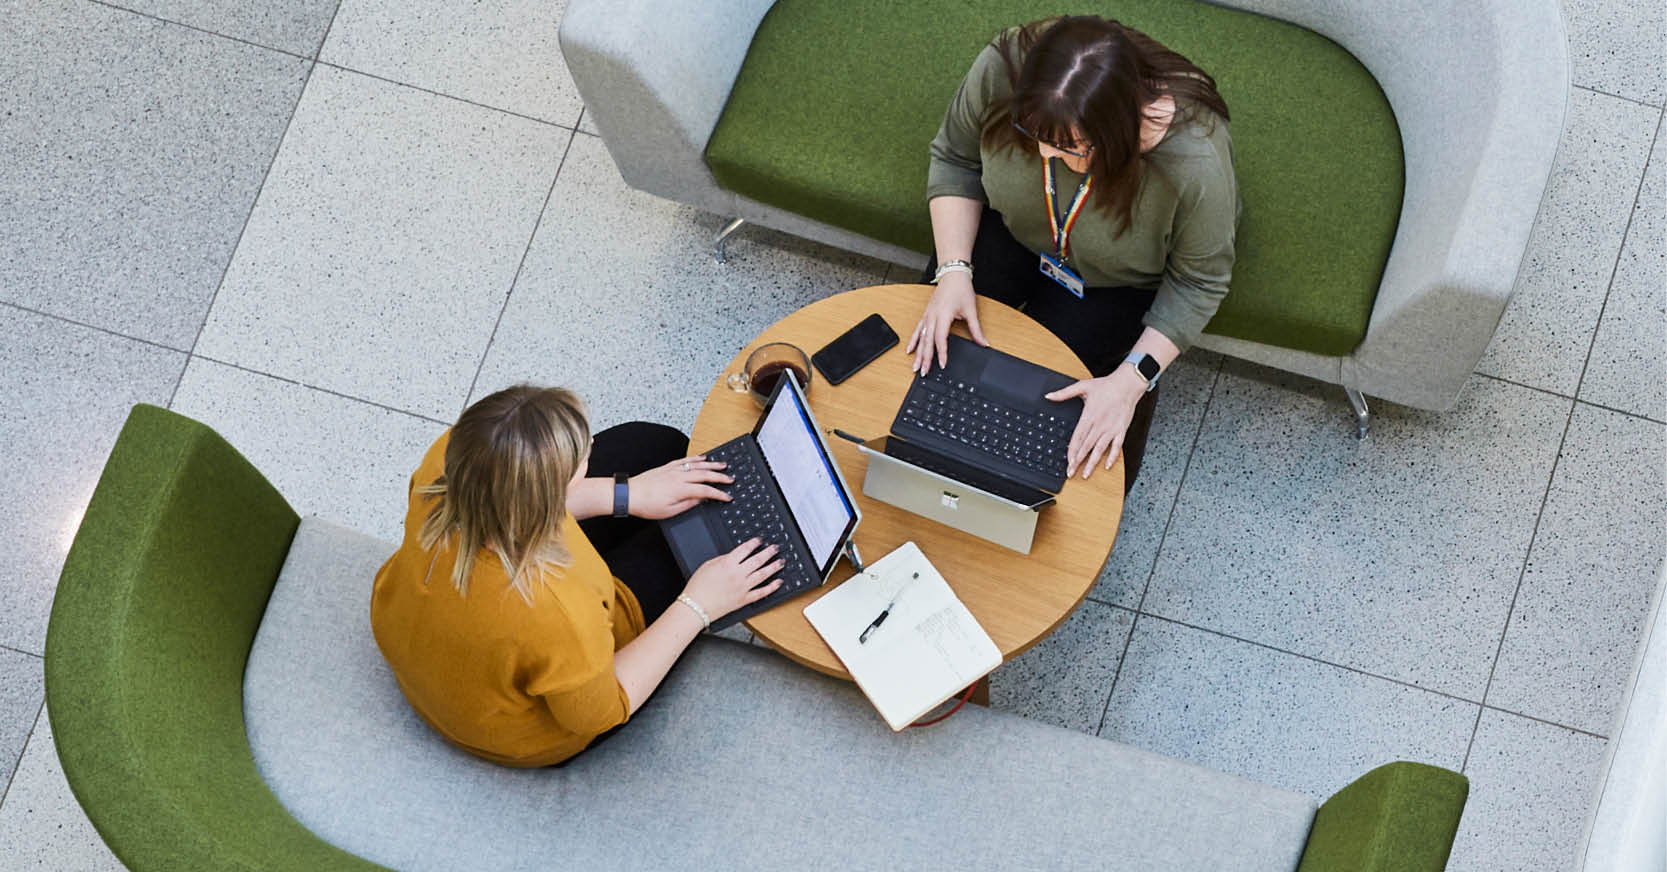 Top-down photo of two people working on laptops at an office cafeteria table